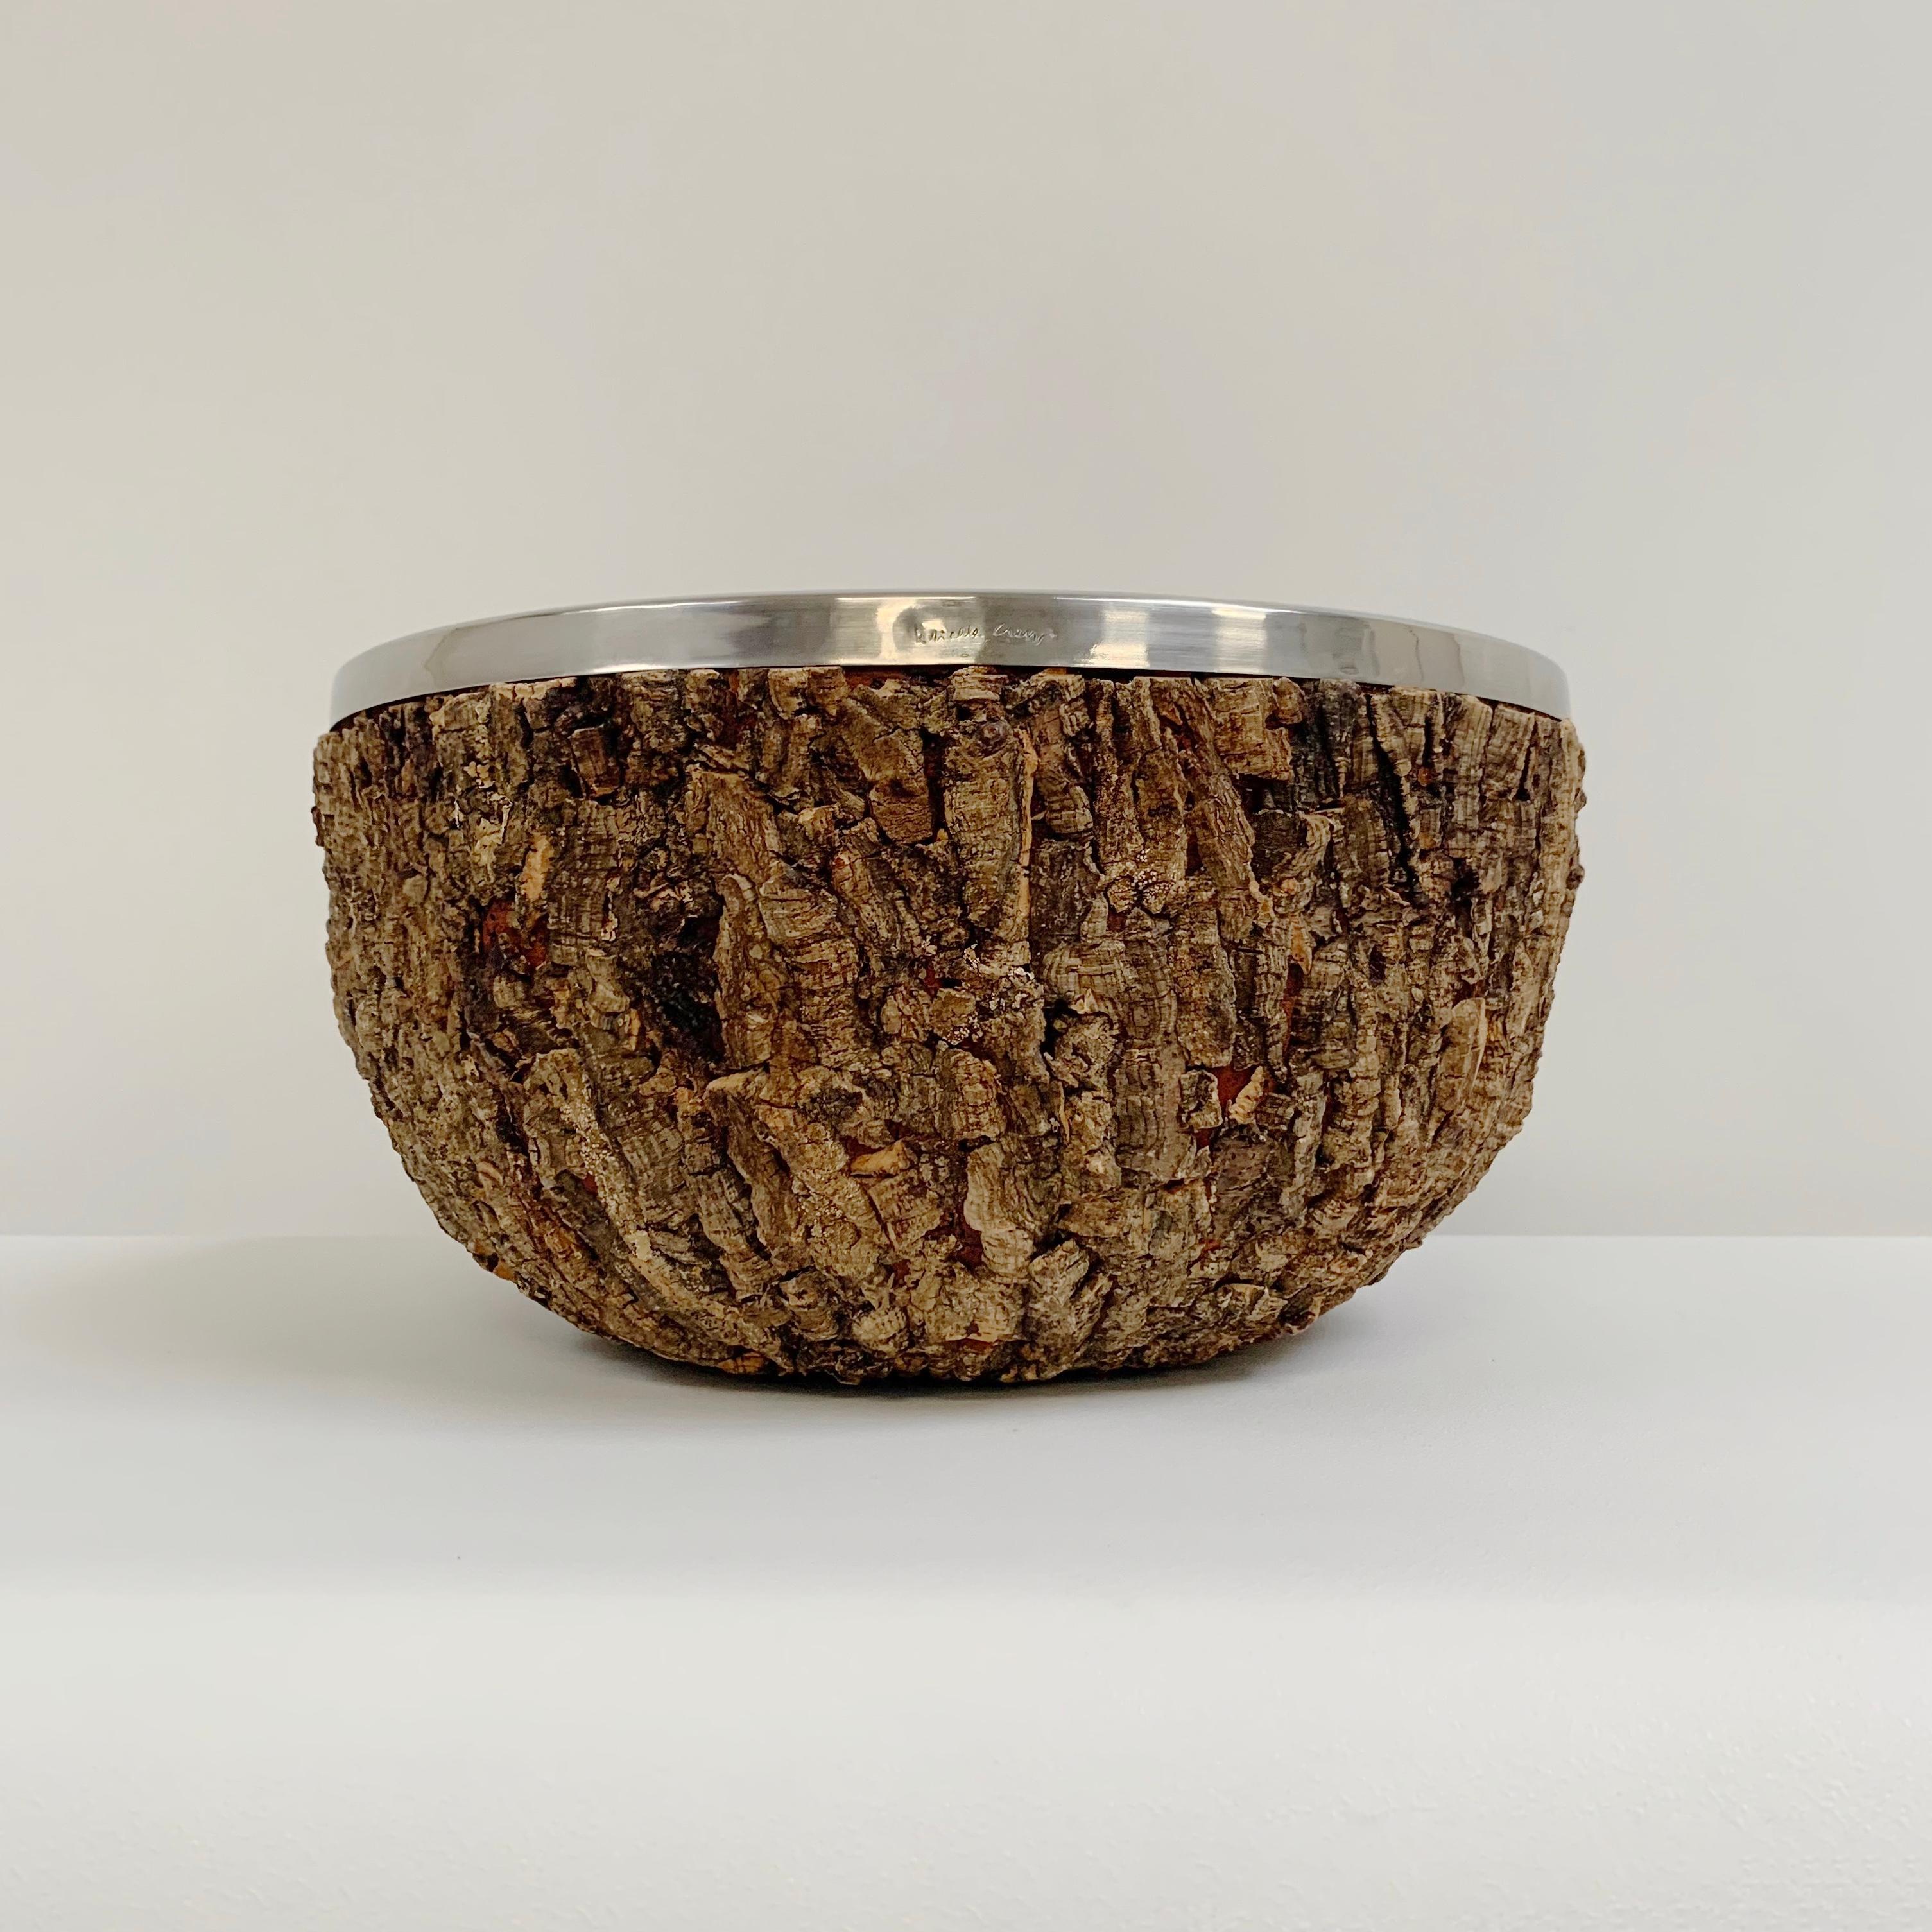 Gabrielle Crespi Signed Large Cork Bowl, circa 1974, Italy. For Sale 4